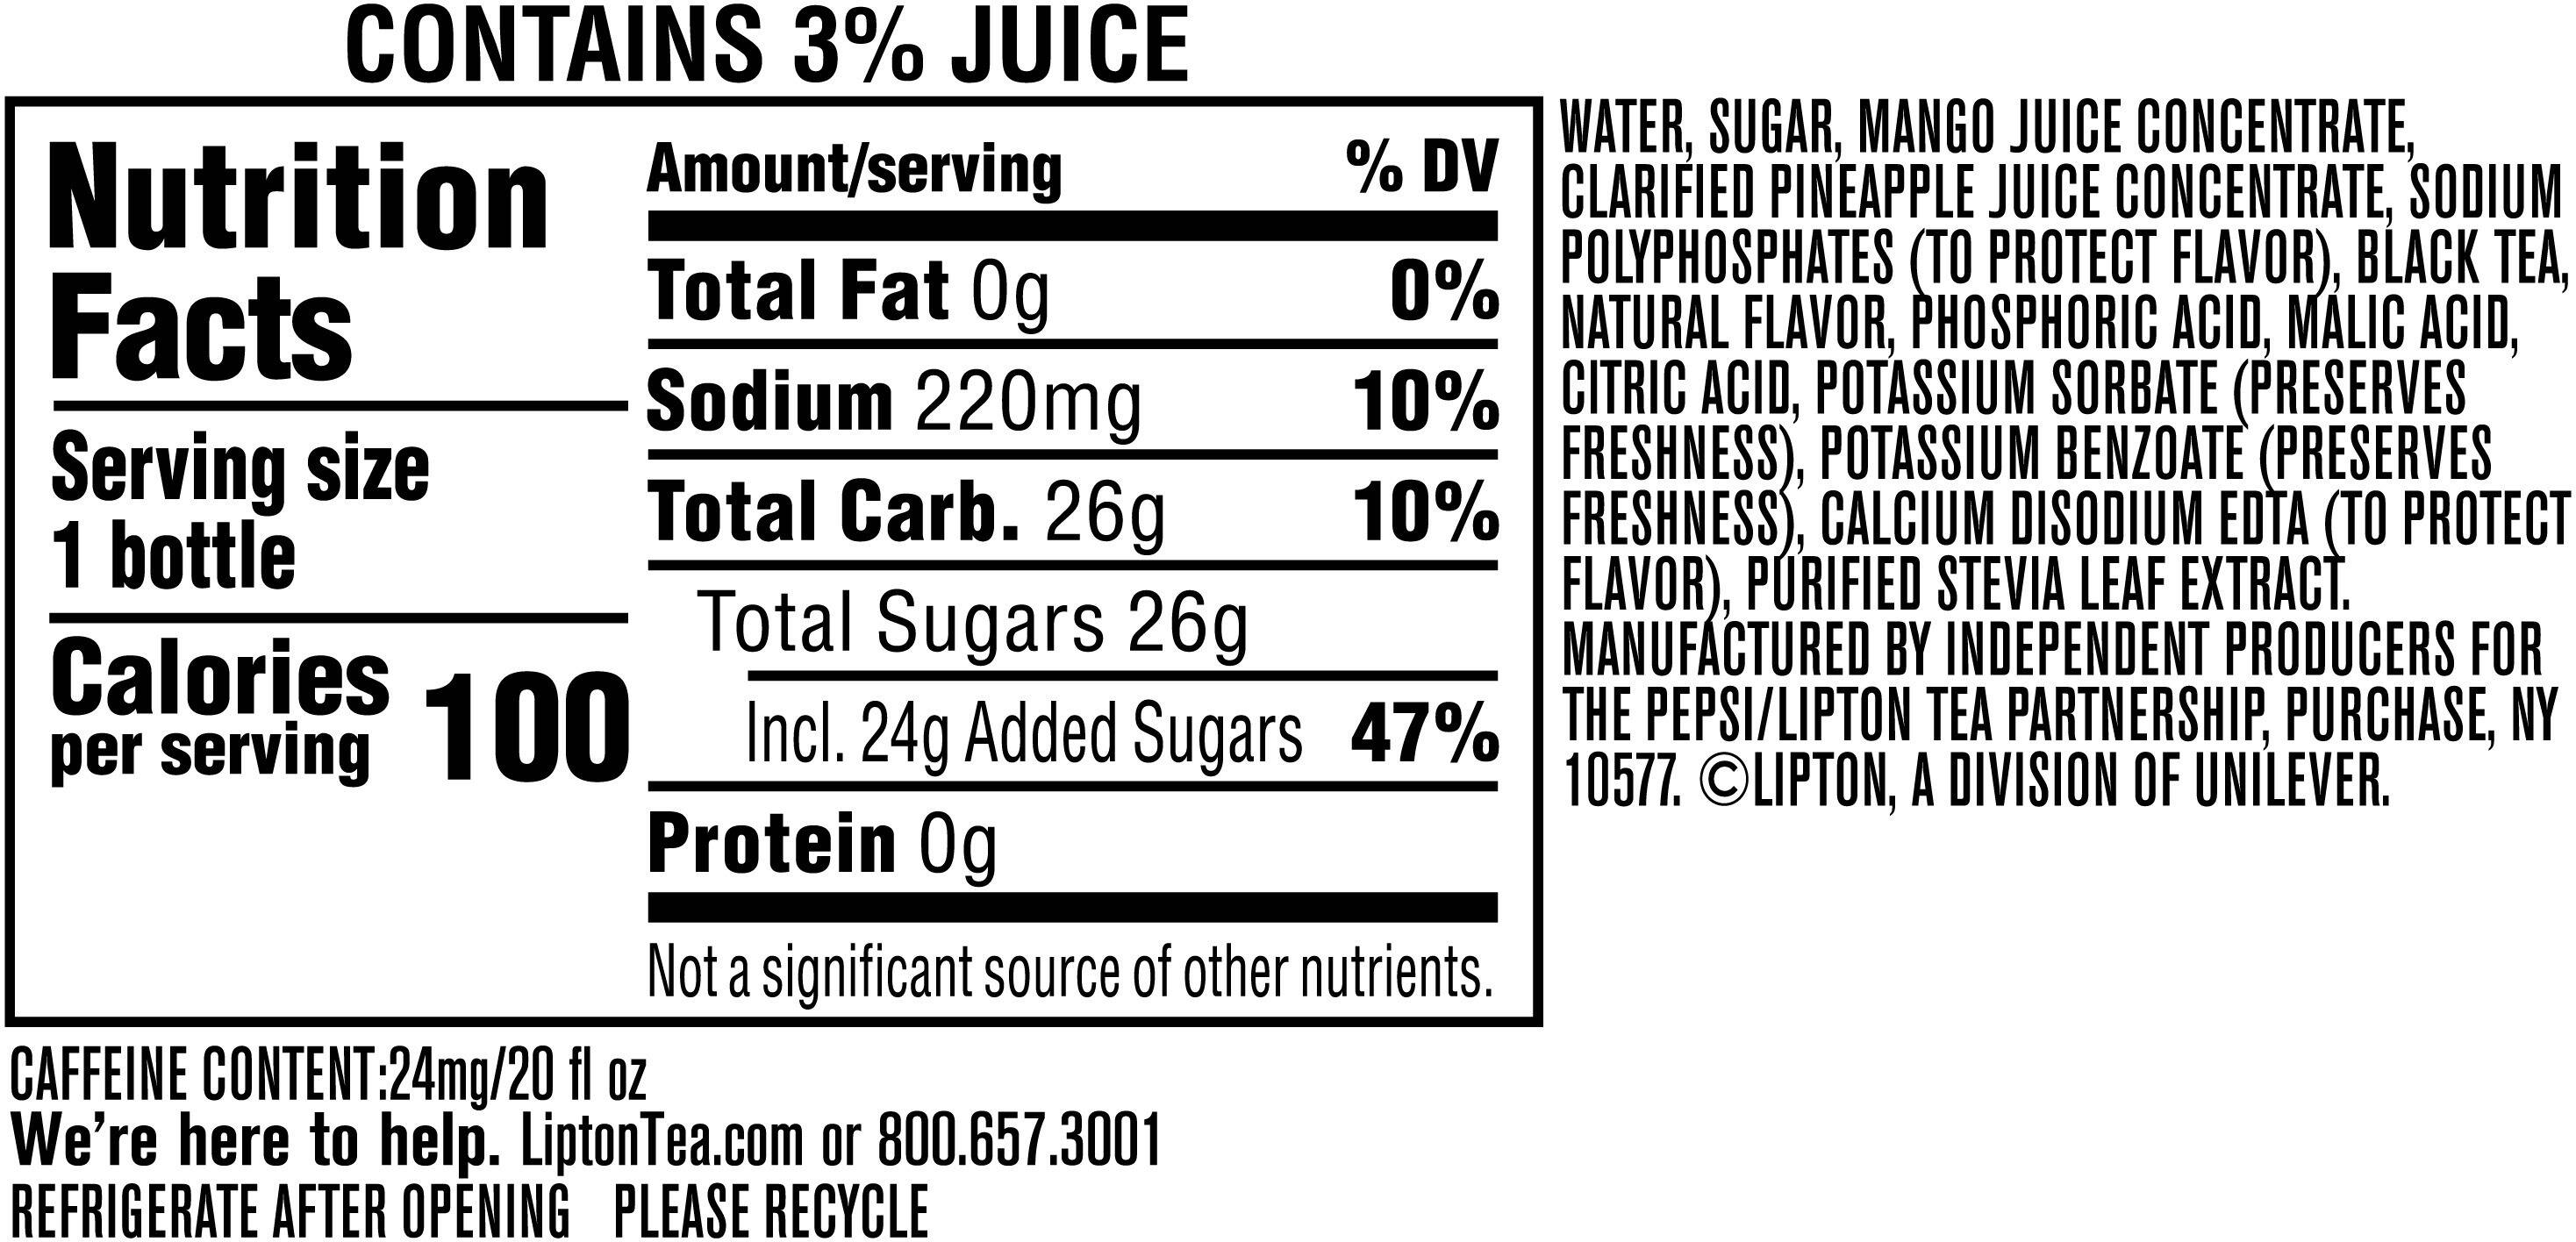 Image describing nutrition information for product Lipton Iced Tea with a Splash of Juice Tropical